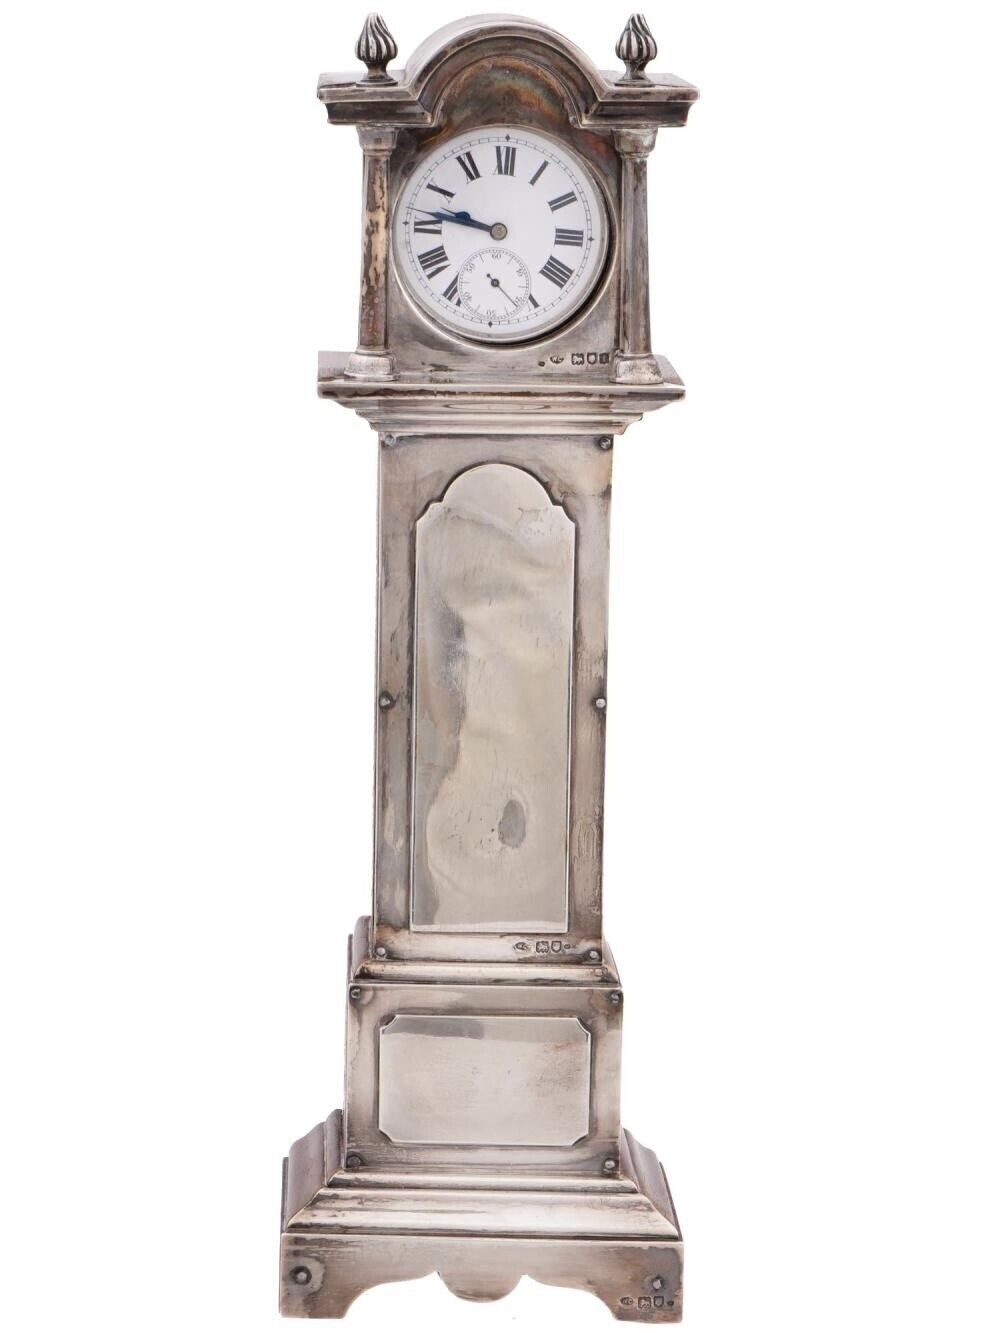 Antique Sterling Silver Grandfather Clock Station 10.5” H With Pocket Watch